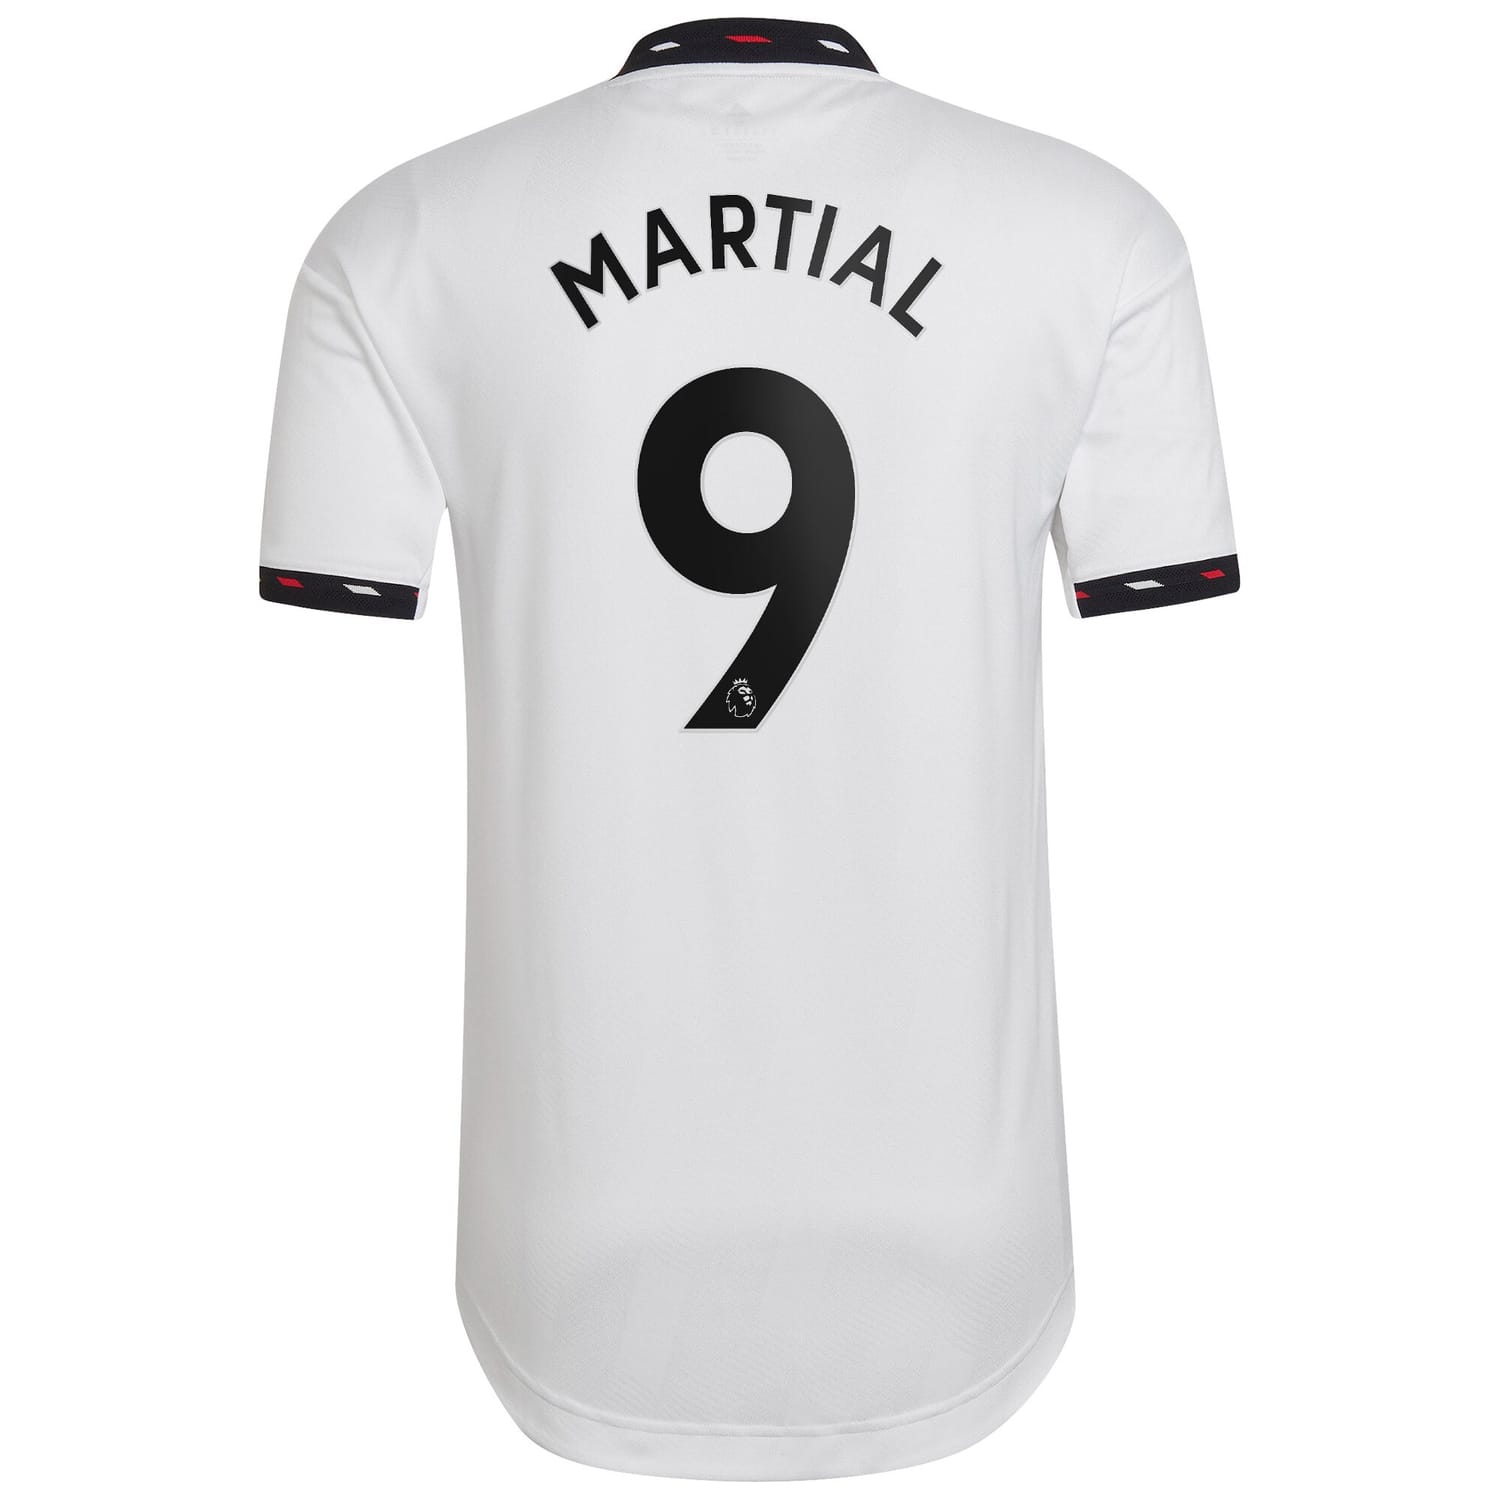 Premier League Manchester United Away Authentic Jersey Shirt 2022-23 player Anthony Martial 9 printing for Men